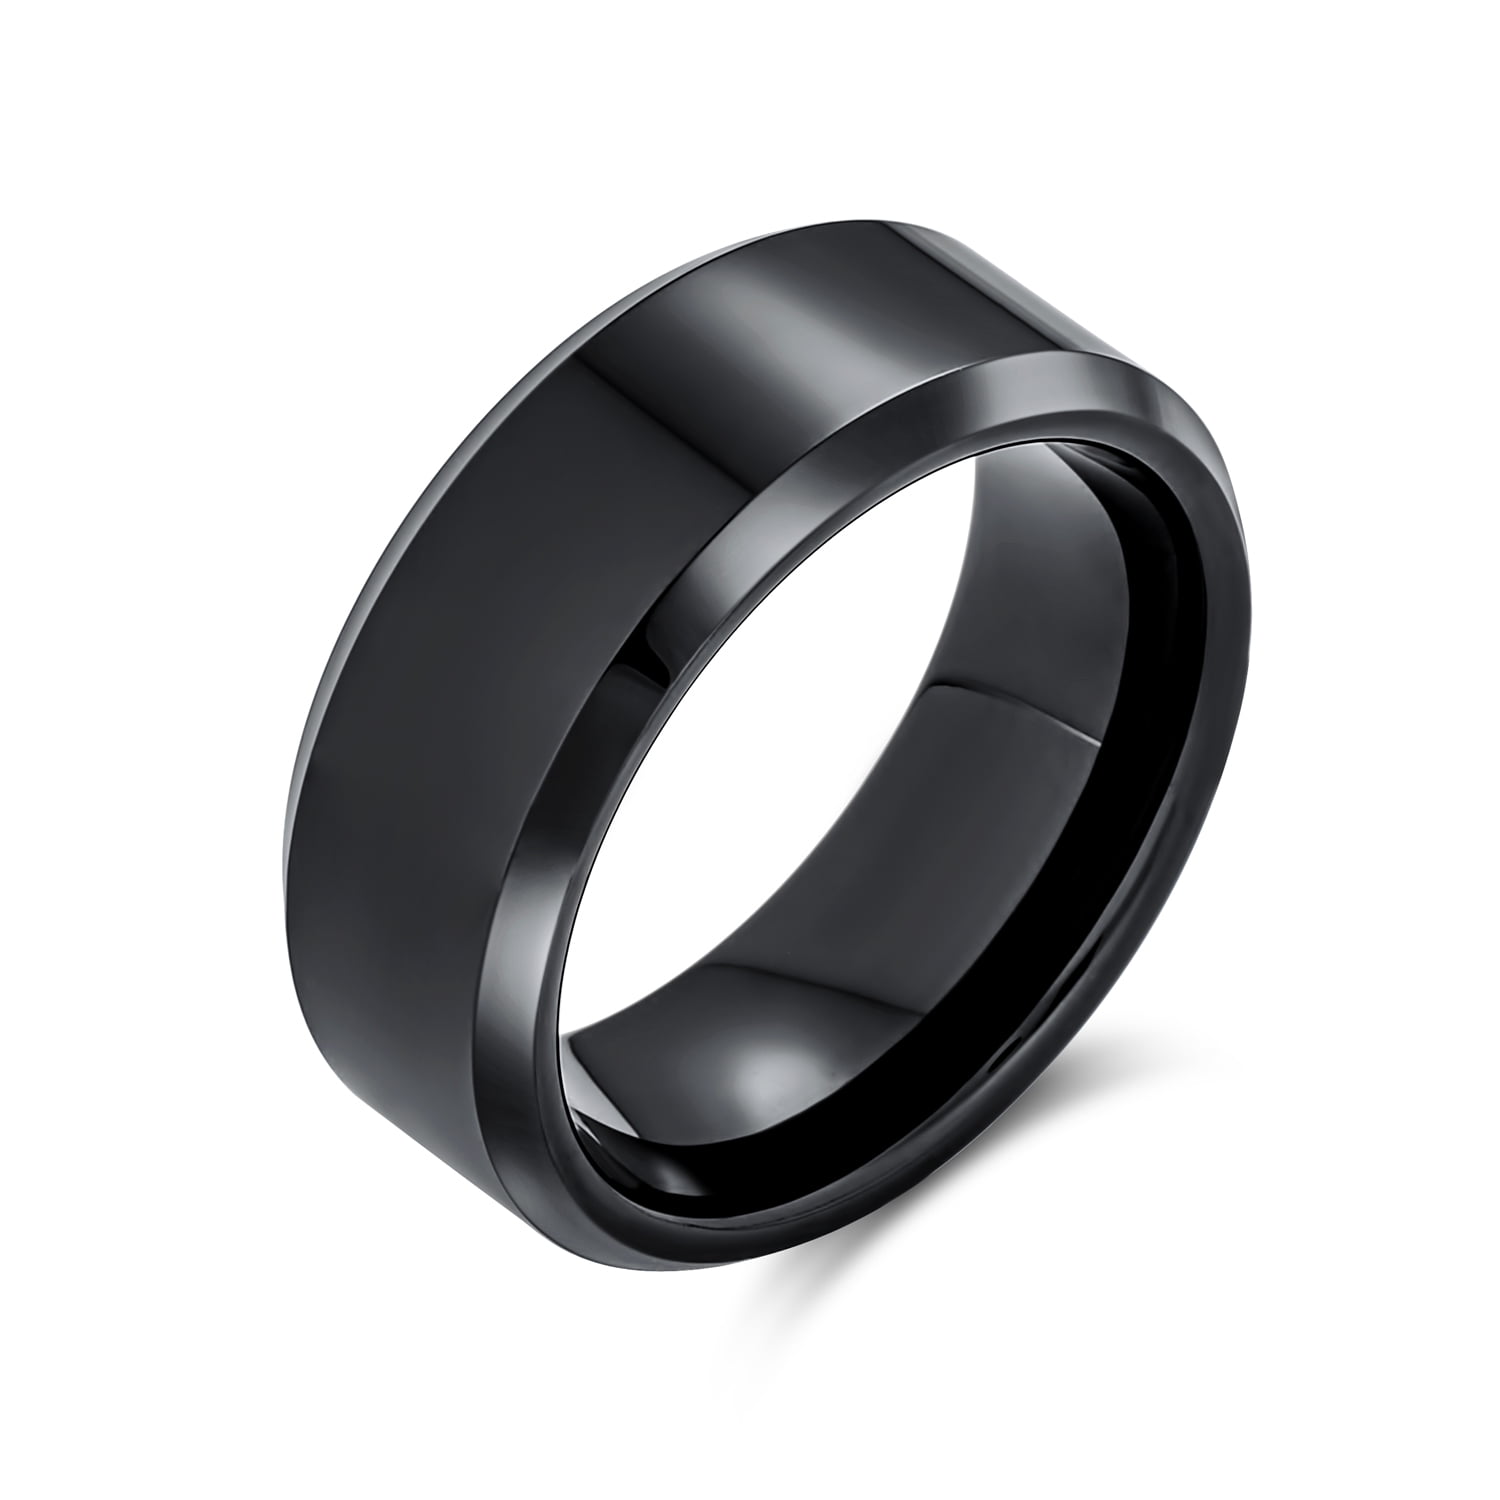 TITANIUM Plain Ring Band with Black Accented Edges NEW in Gift Box size 9 